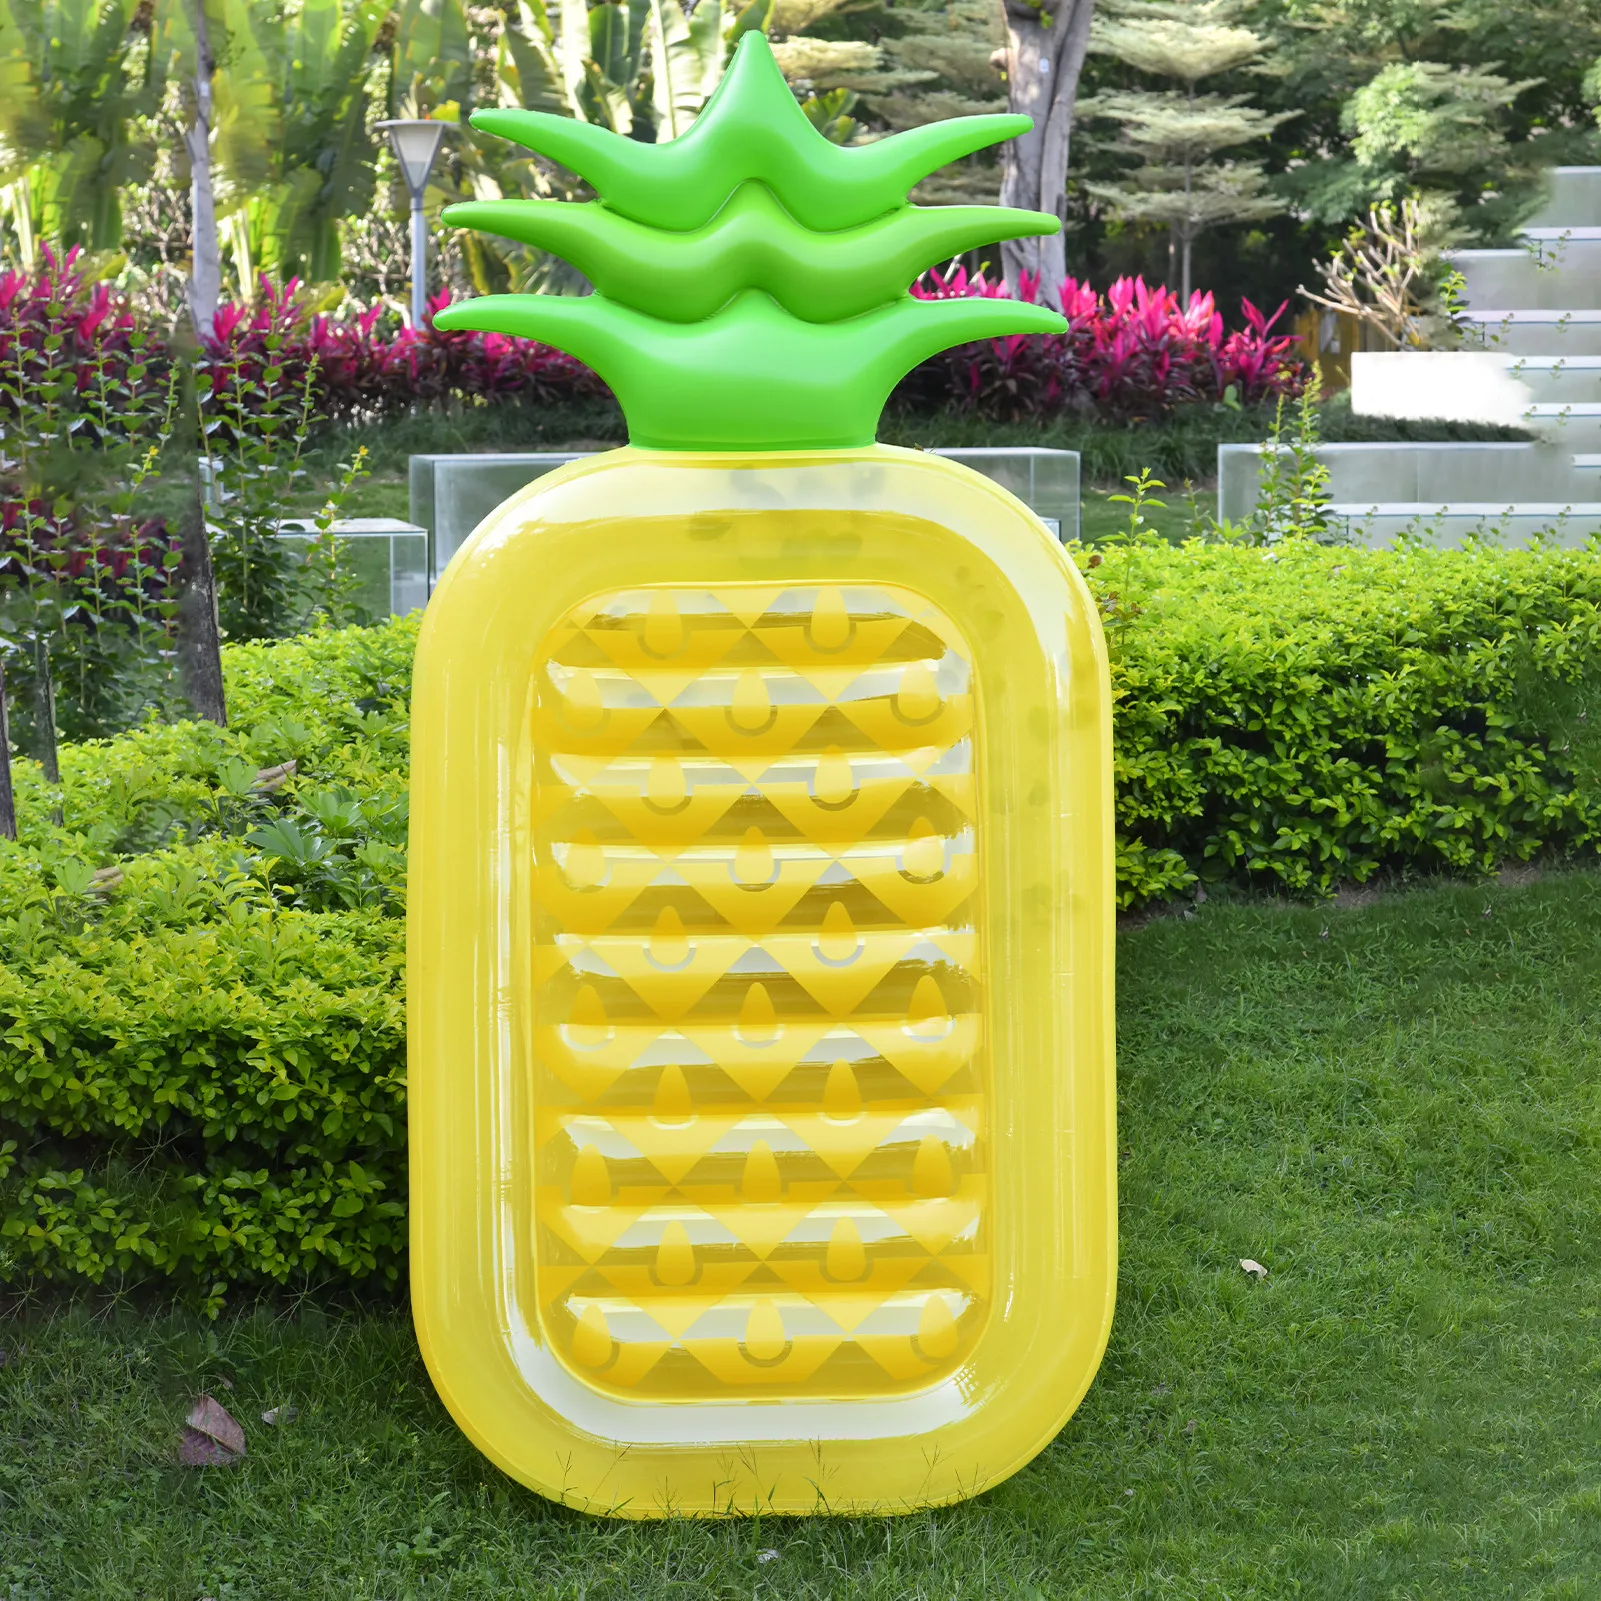 

2022 Iatable Pineapple Giant Pool Floats Swimming Ring Summer Large Float Raft Pool Accessories Air Mattress Beach Pool Toys